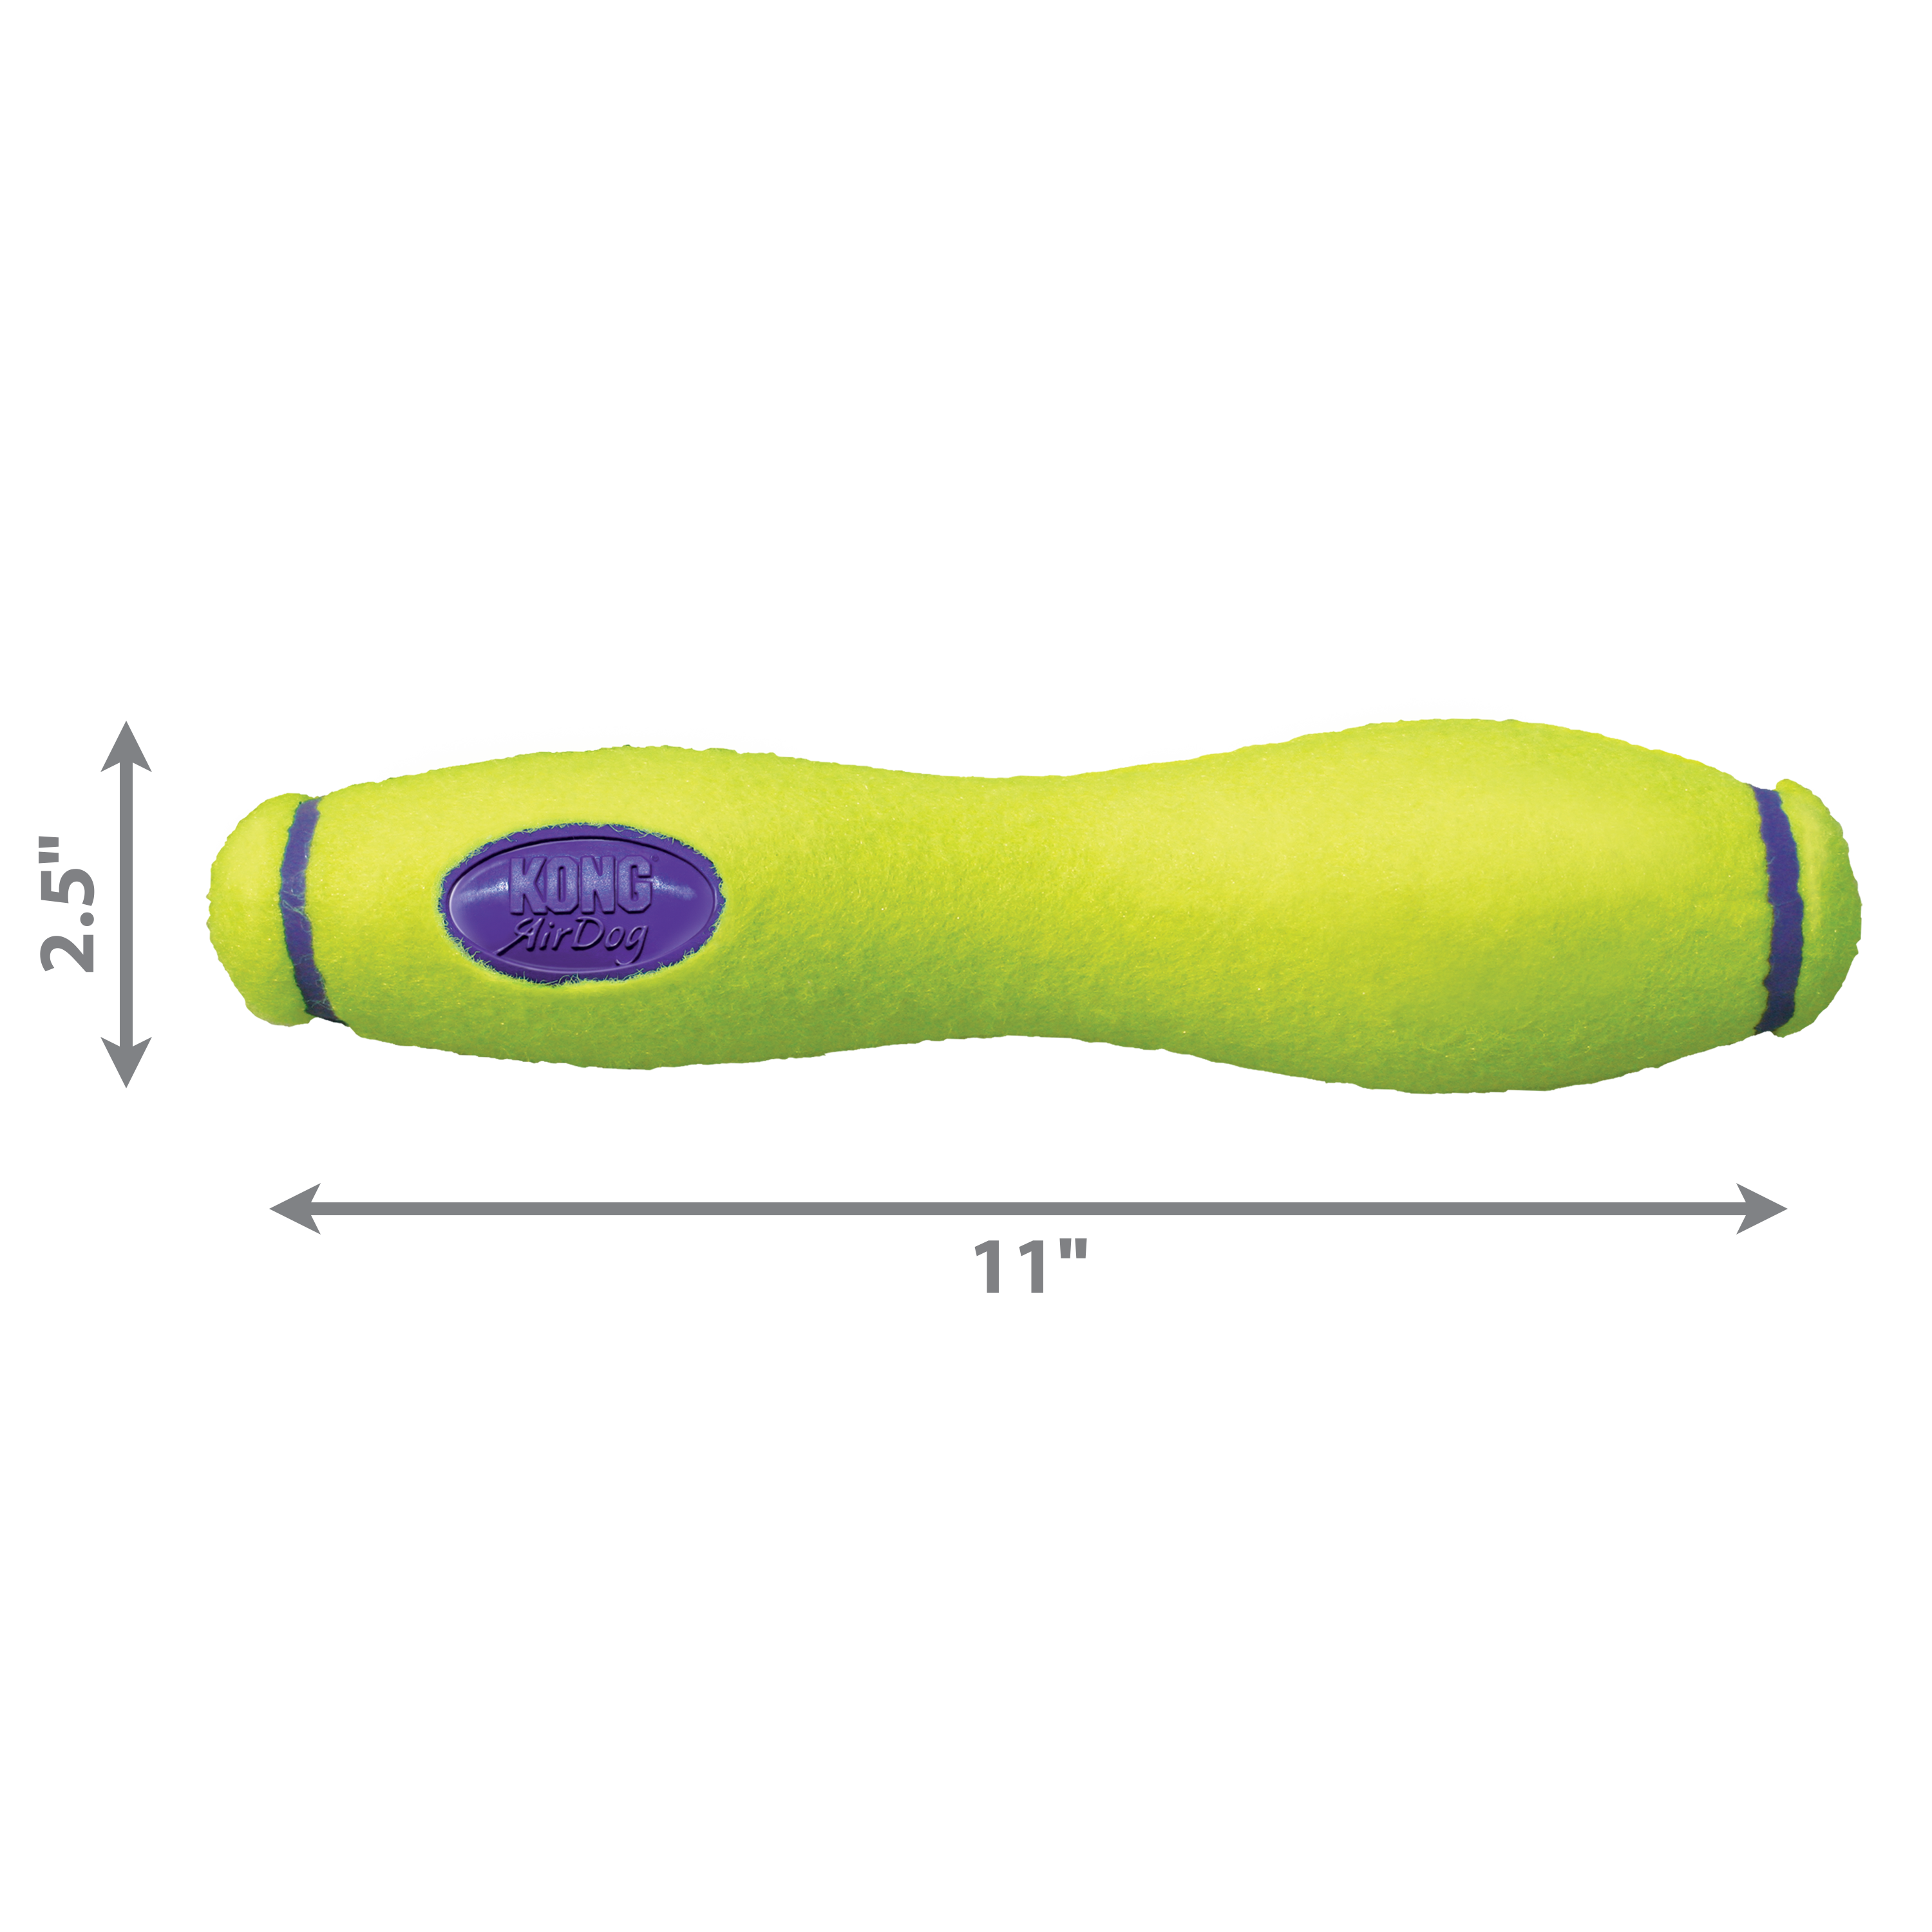 AirDog Squeaker Stick dimoffpack product image